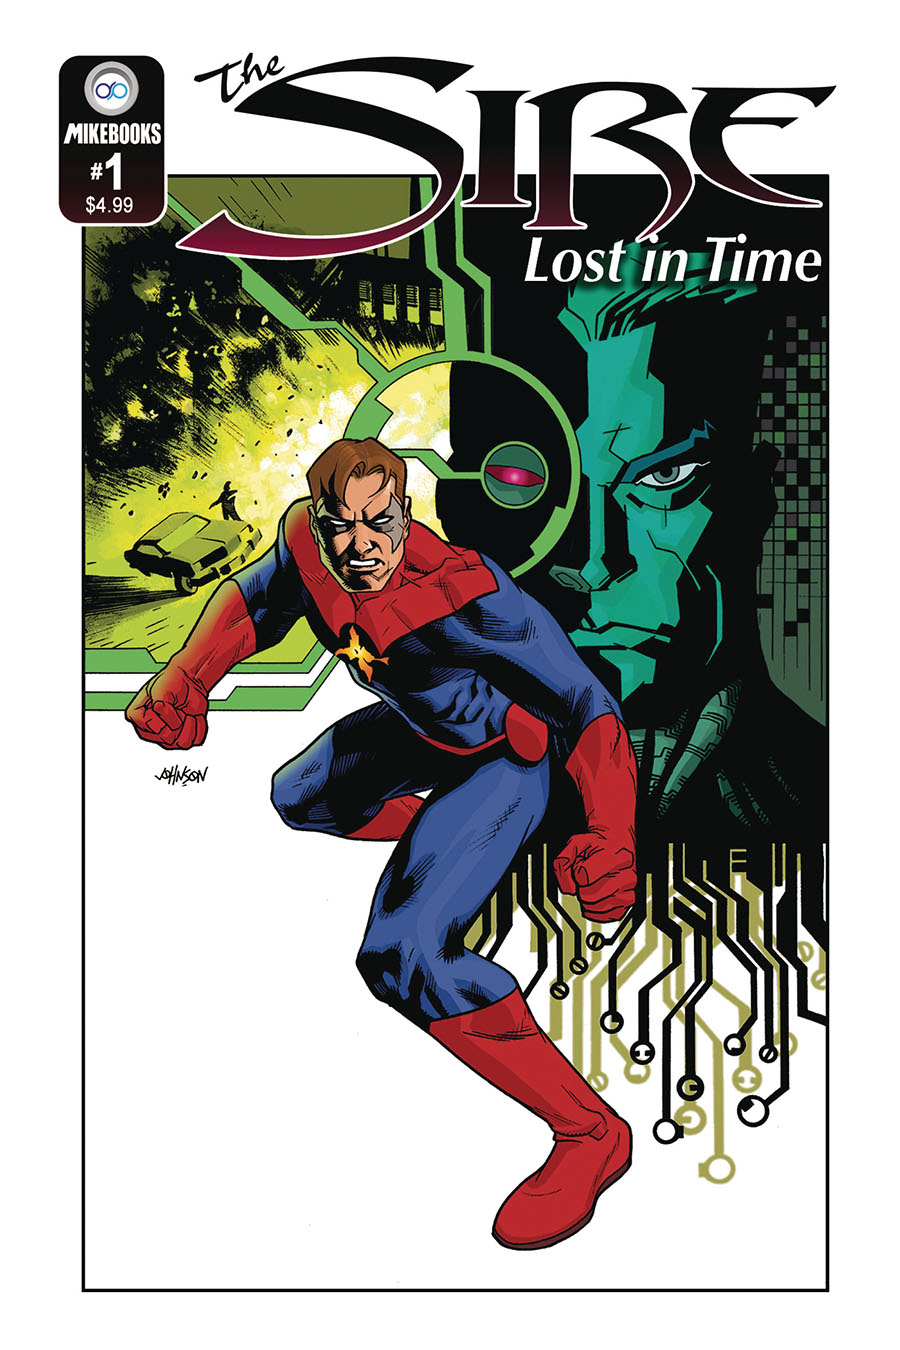 Sire Lost In Time #1